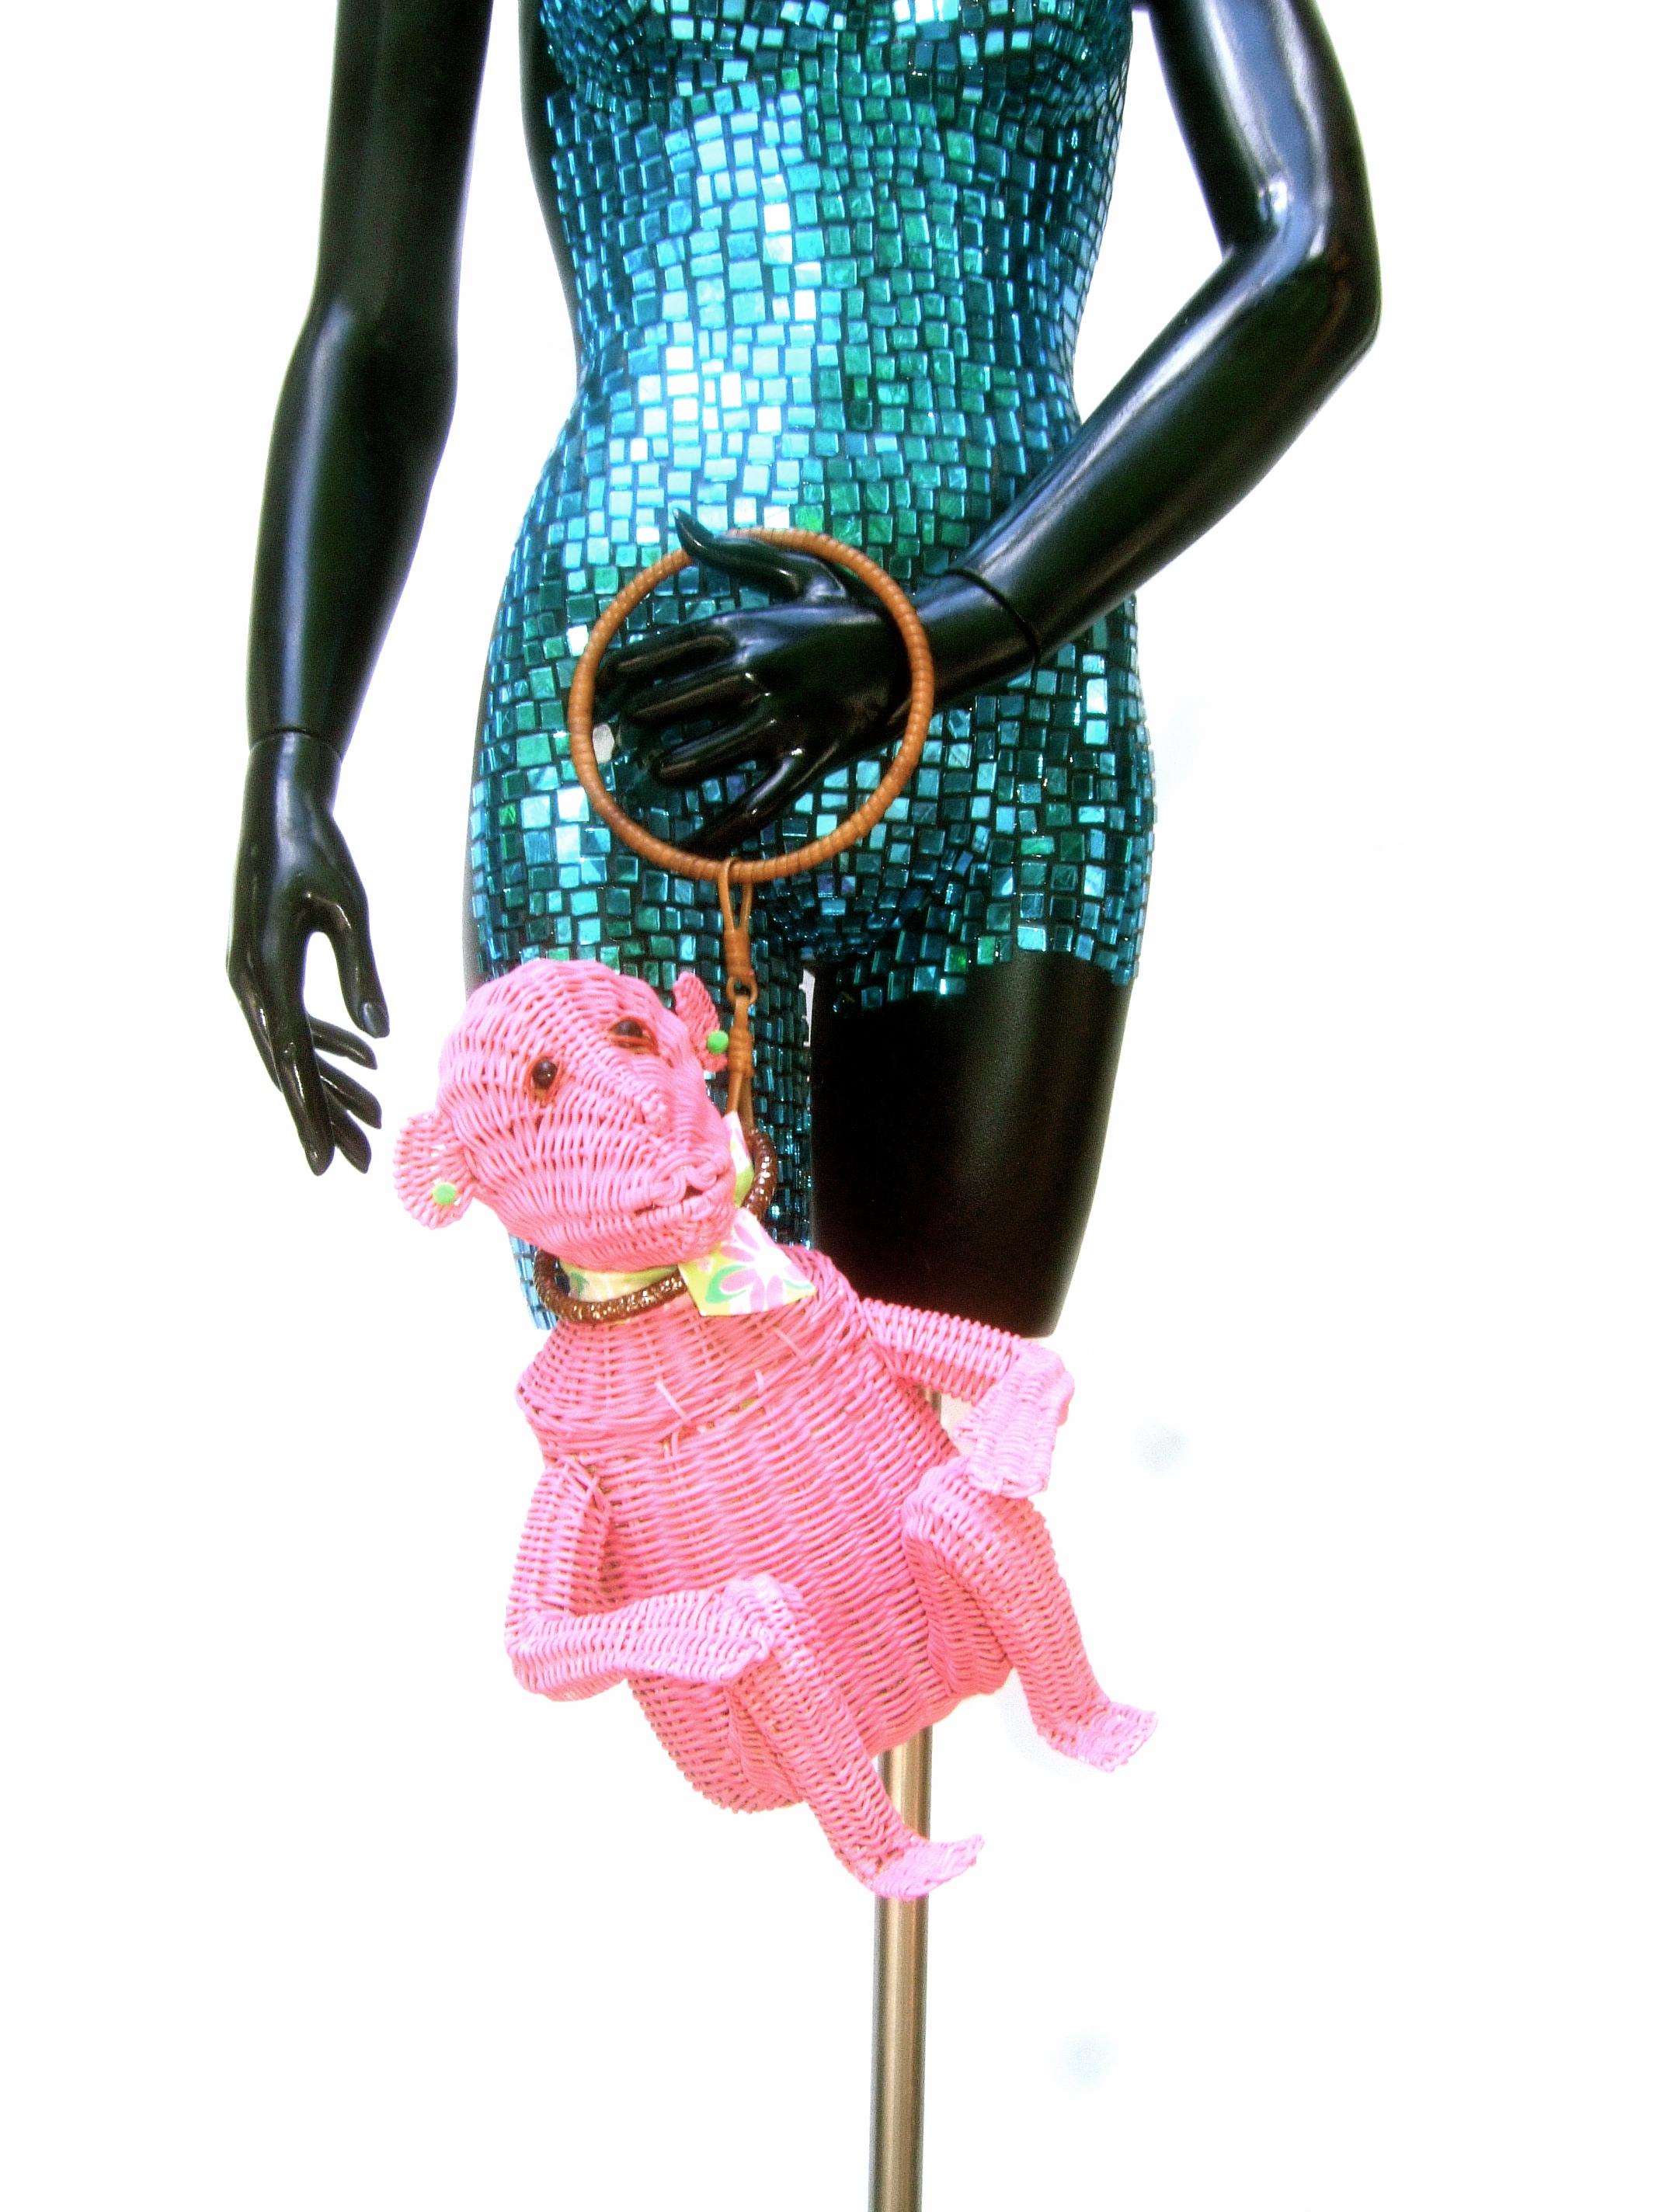 Whimsical Vintage Wicker Monkey Handbag With Lilly Pulitzer Fabric c 1950's  7